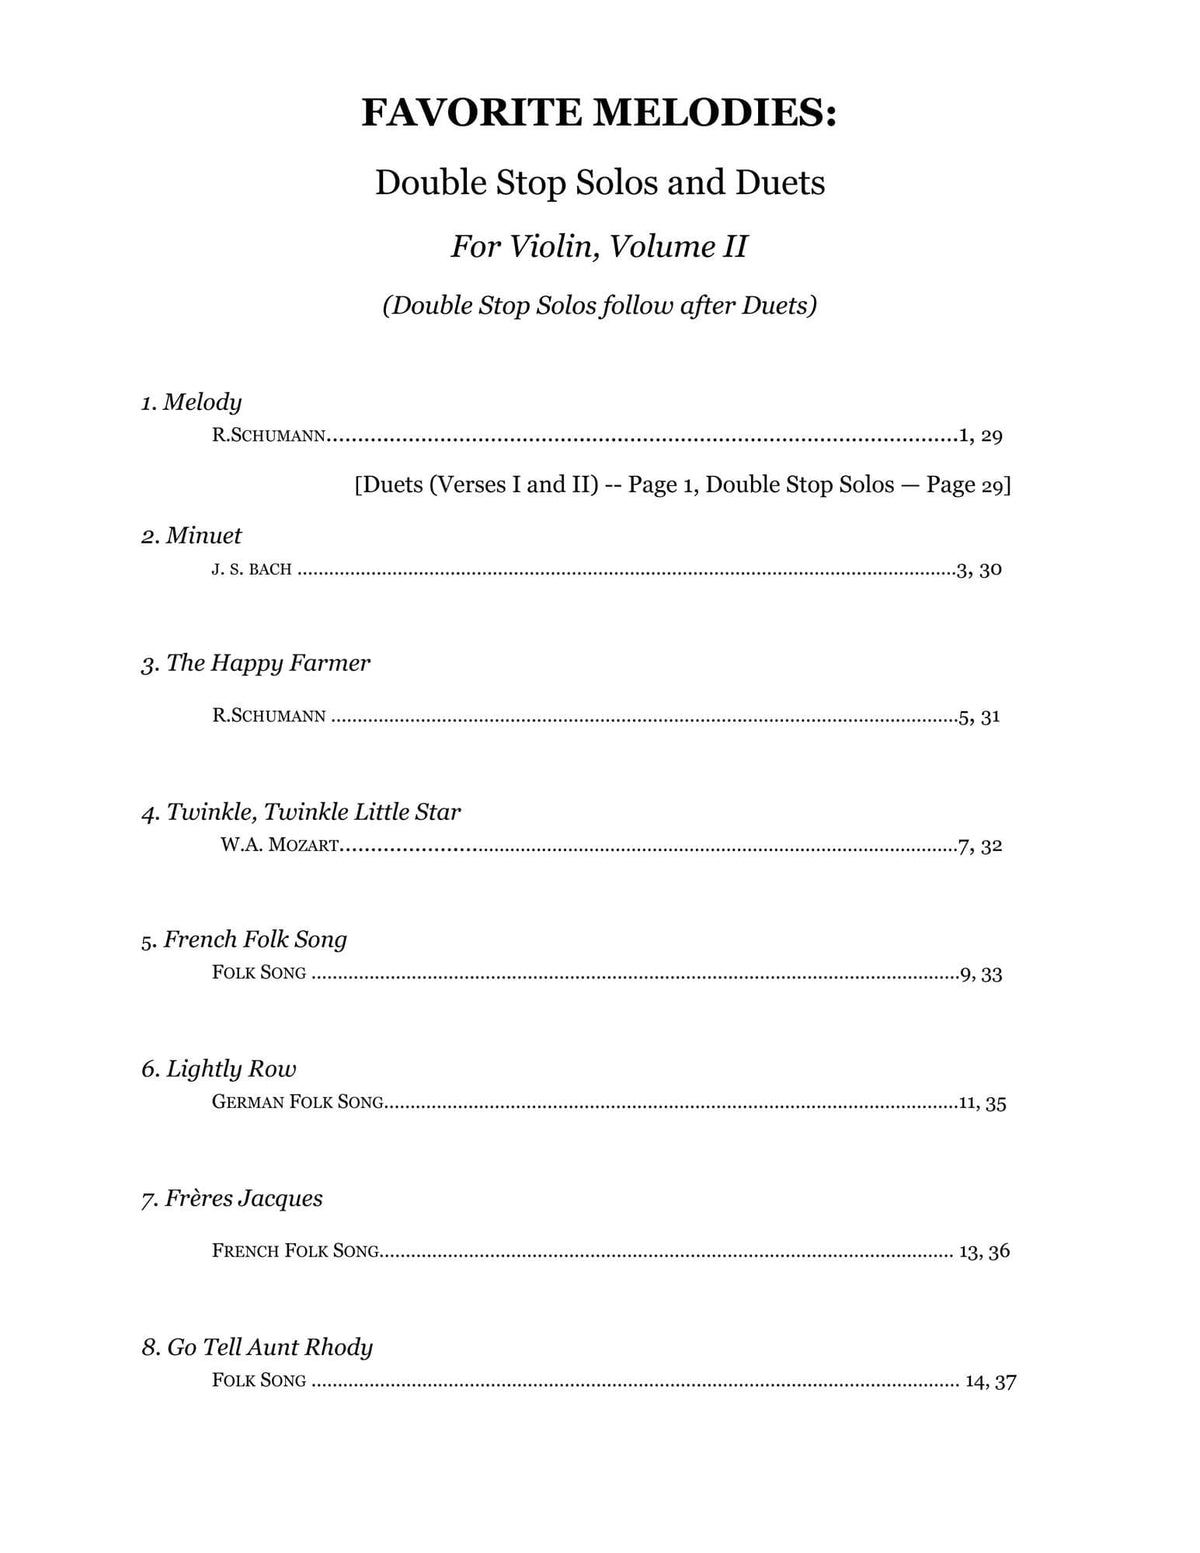 Yasuda, Martha - Favorite Melodies: Double Stop Solos and Duets for Violin, Volume II - Digital Download